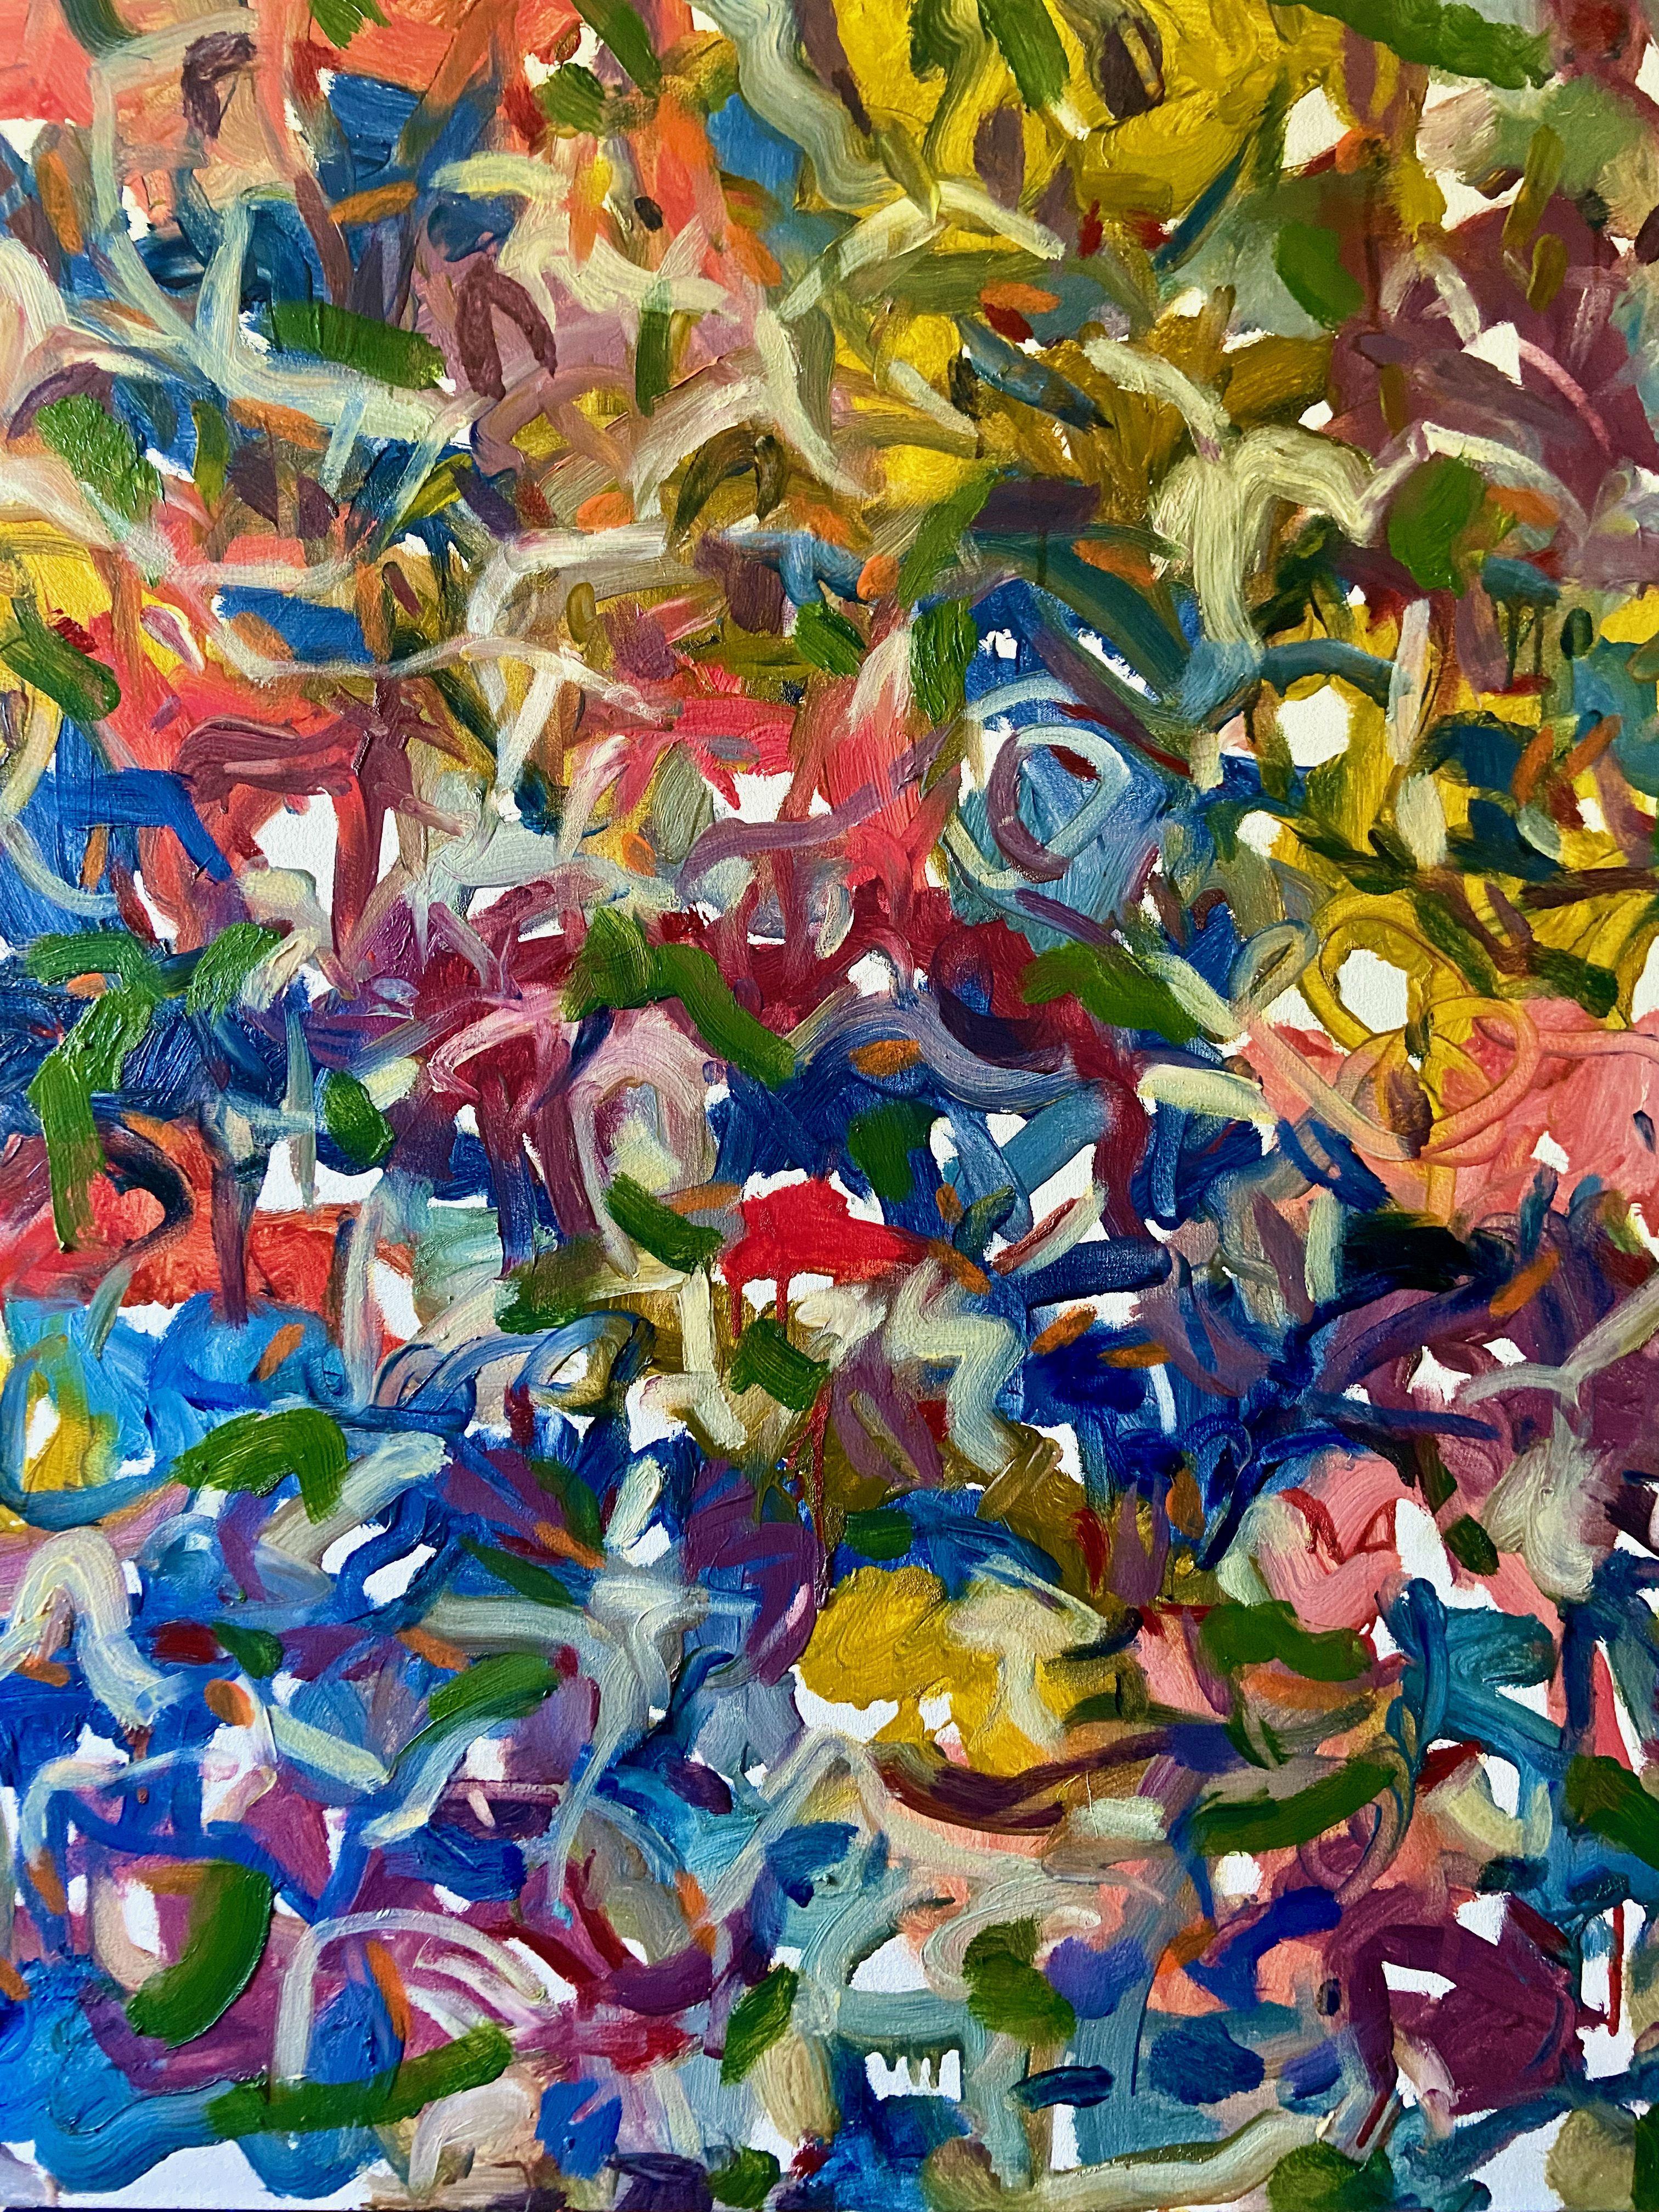 Oil on canvas inspired by nature, life, observations, color theory, travel and dreams. My abstract paintings are all about creating excitement for the viewer through concentrated exploration. Each painting is inspired by nature, travels, or